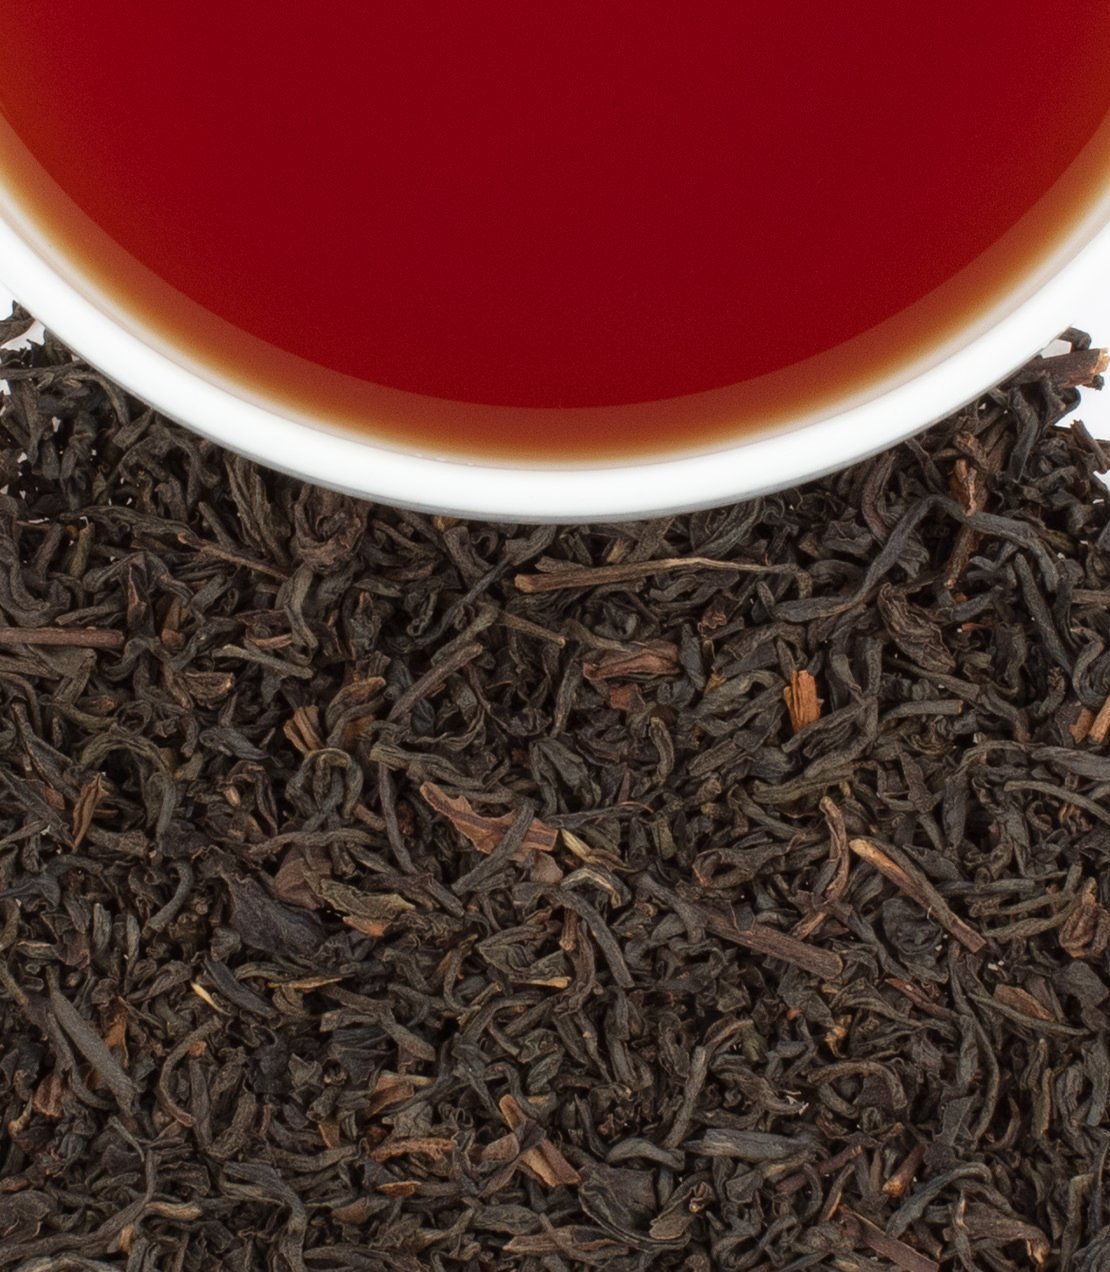 Earl Grey Imperial - Black, and oolong tea, with natural bergamot from Italy  - Harney & Sons Fine Teas Europe